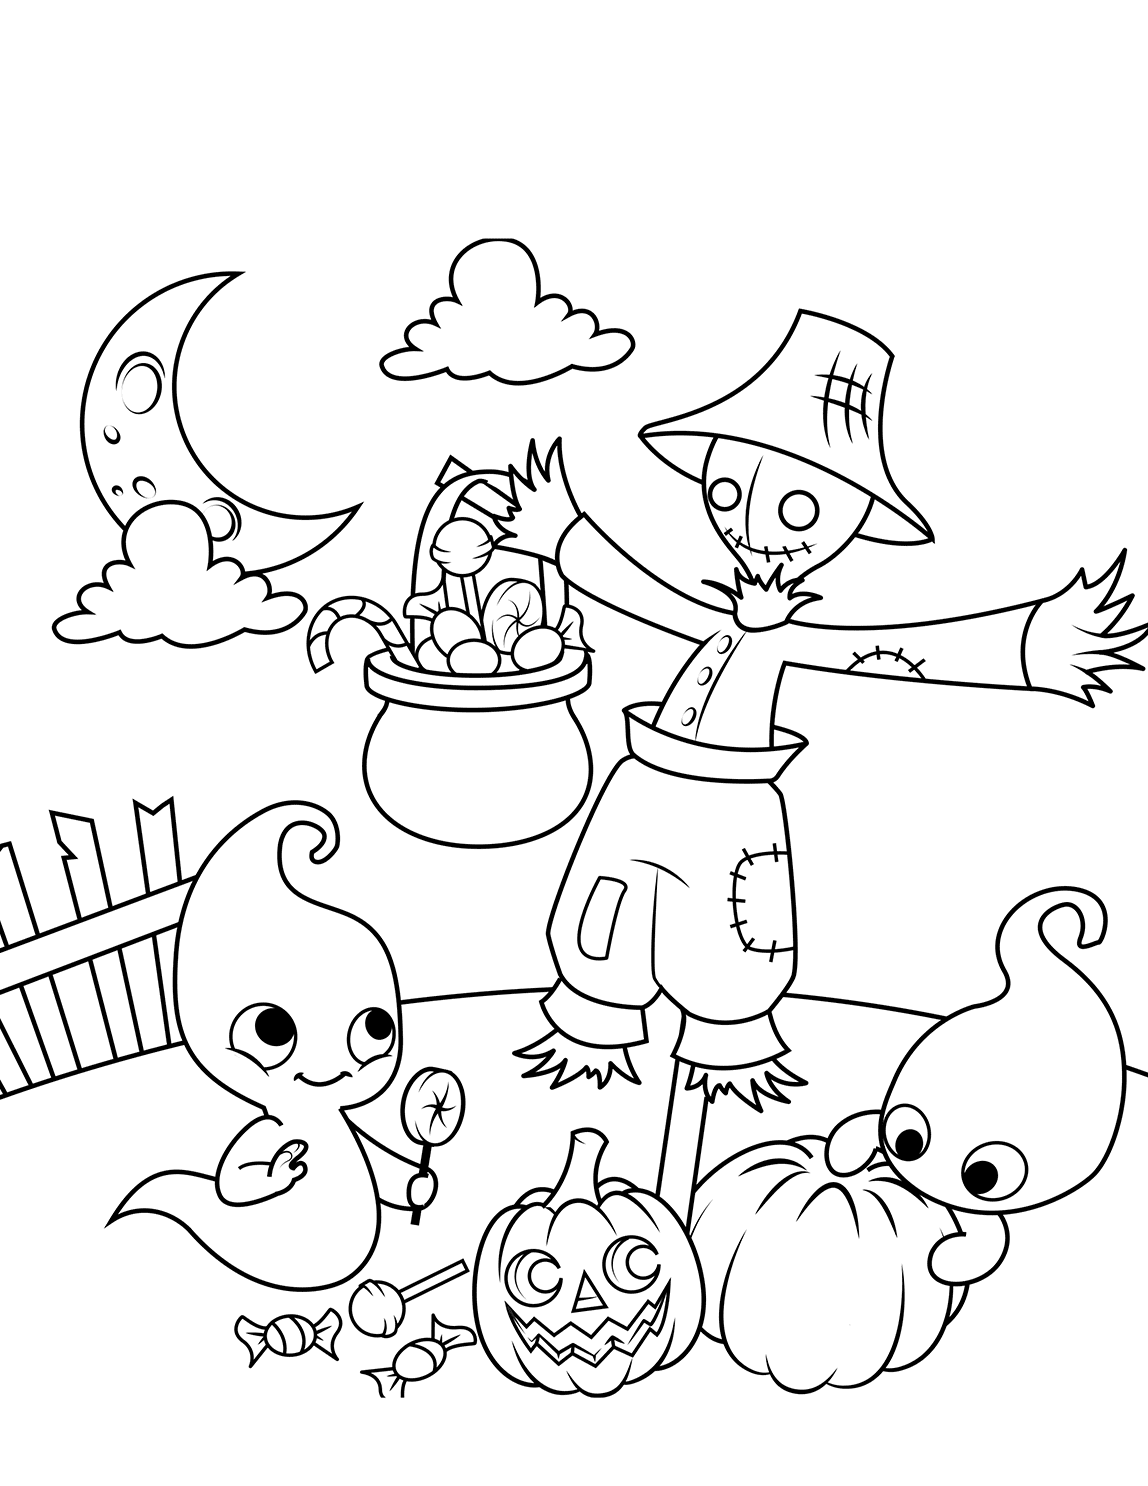 Scene With A Scarecrow And Cute Ghosts Halloween Coloring Page